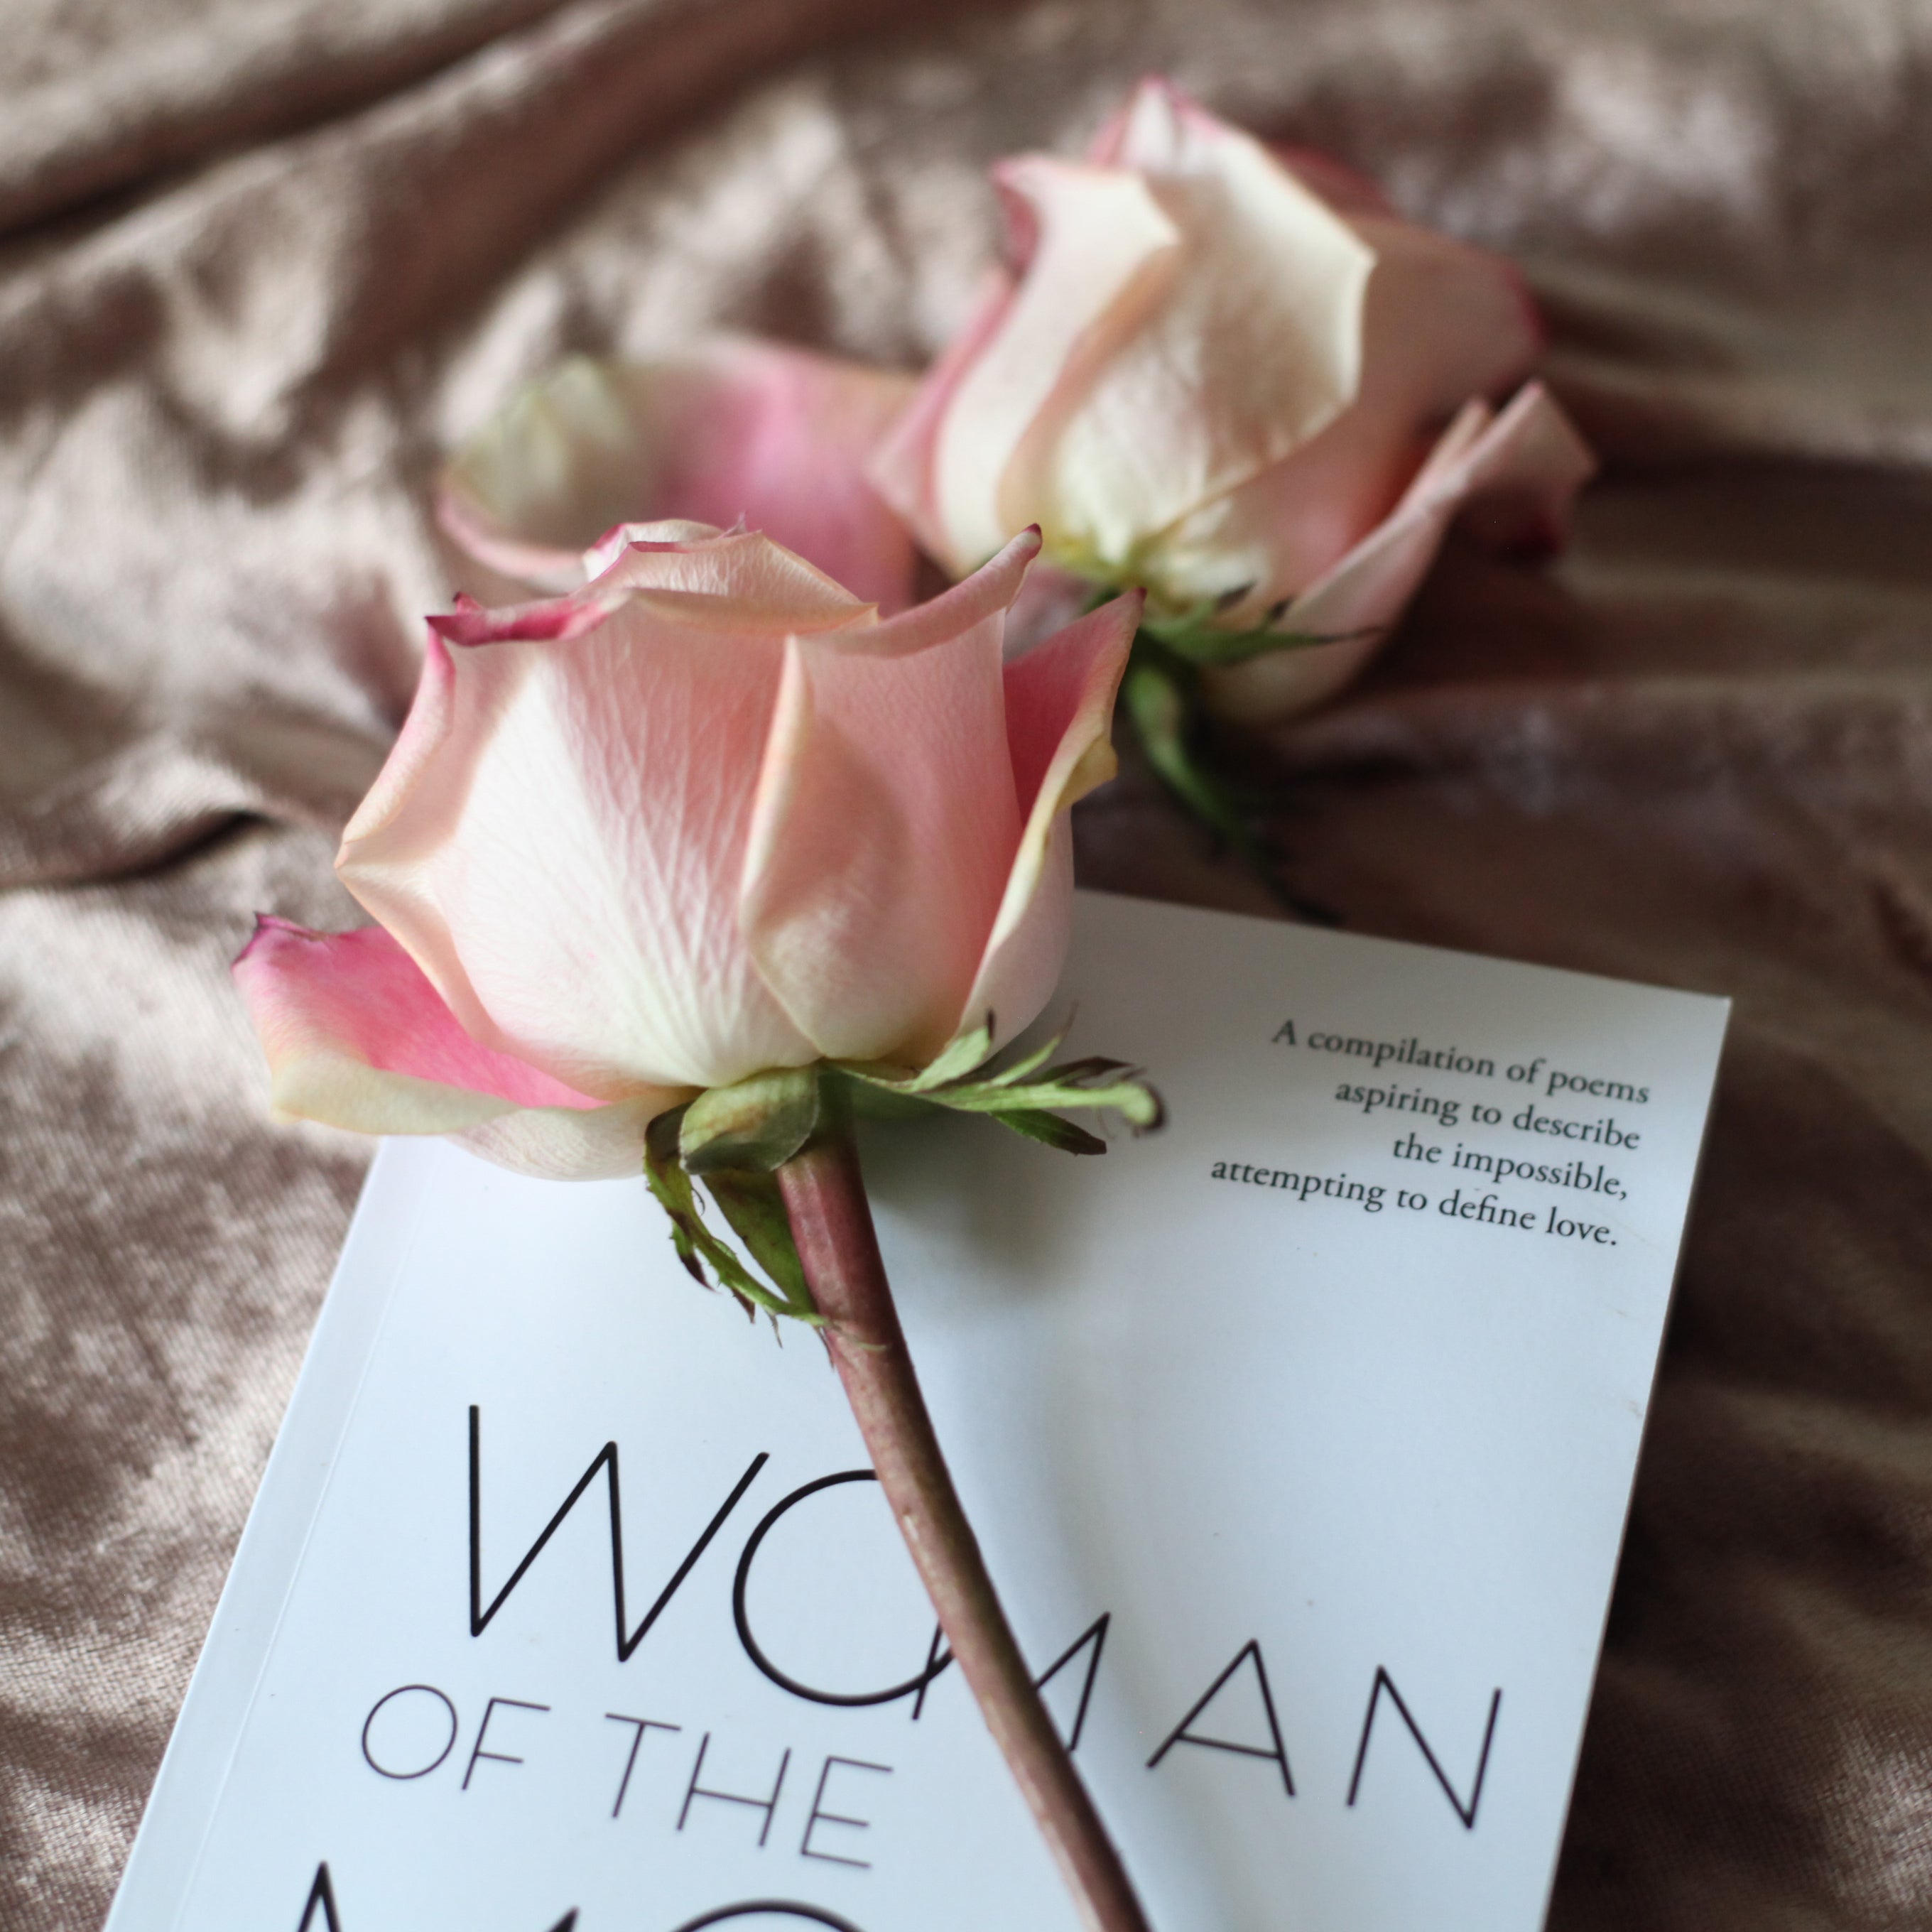 Woman of the Moon: A compilation of poems aspiring to describe love